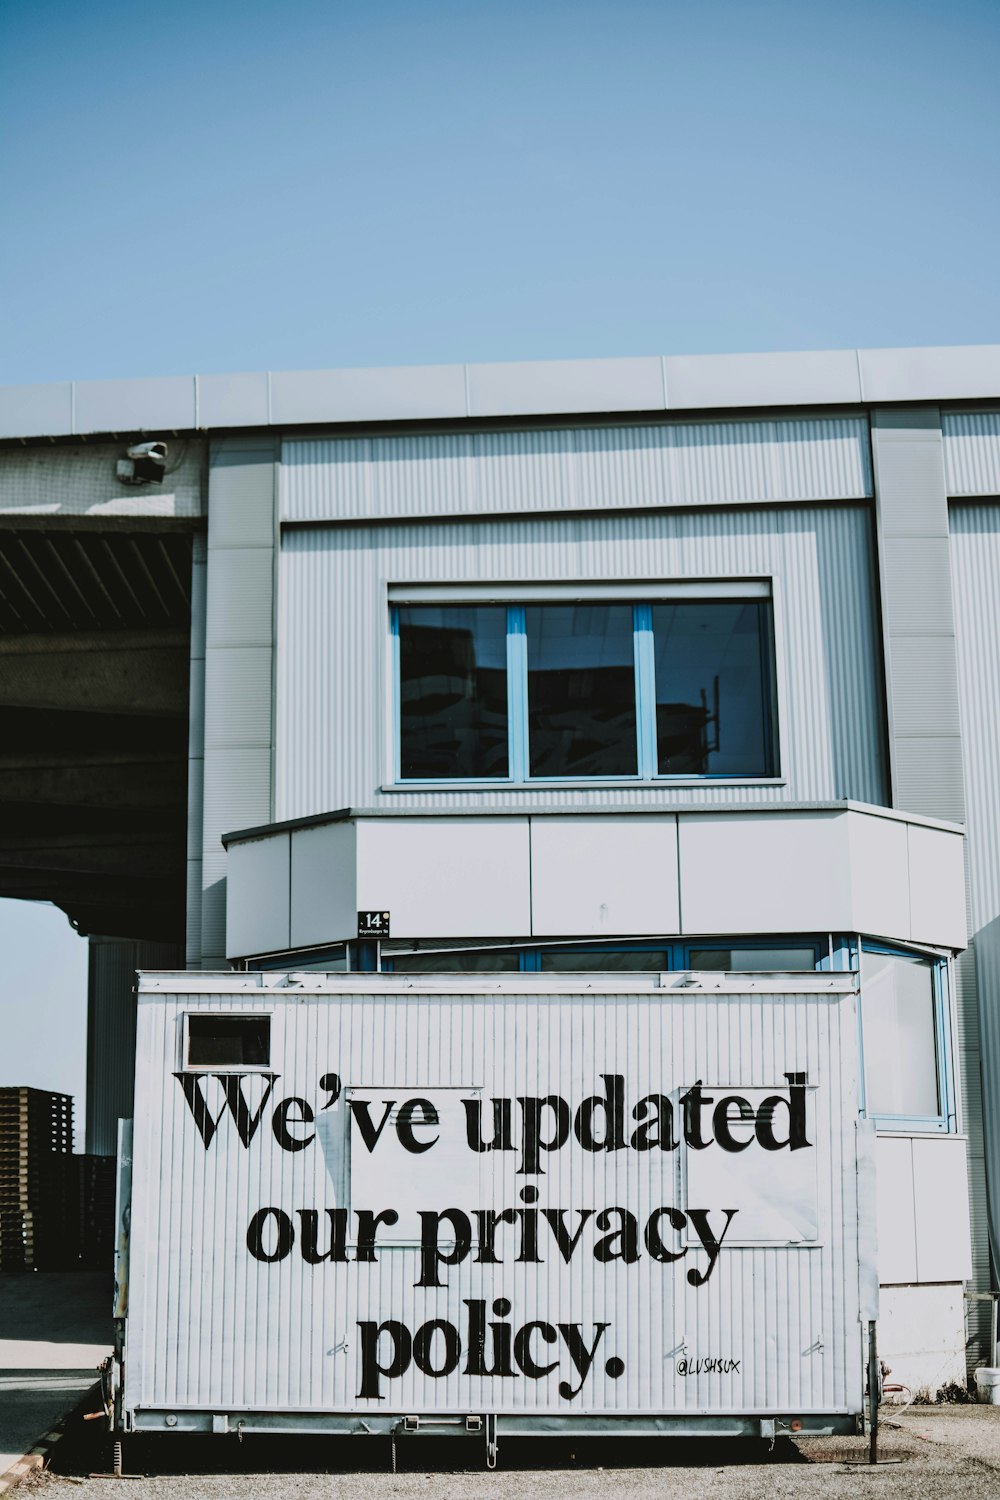 we've updated outr privacy policy sign